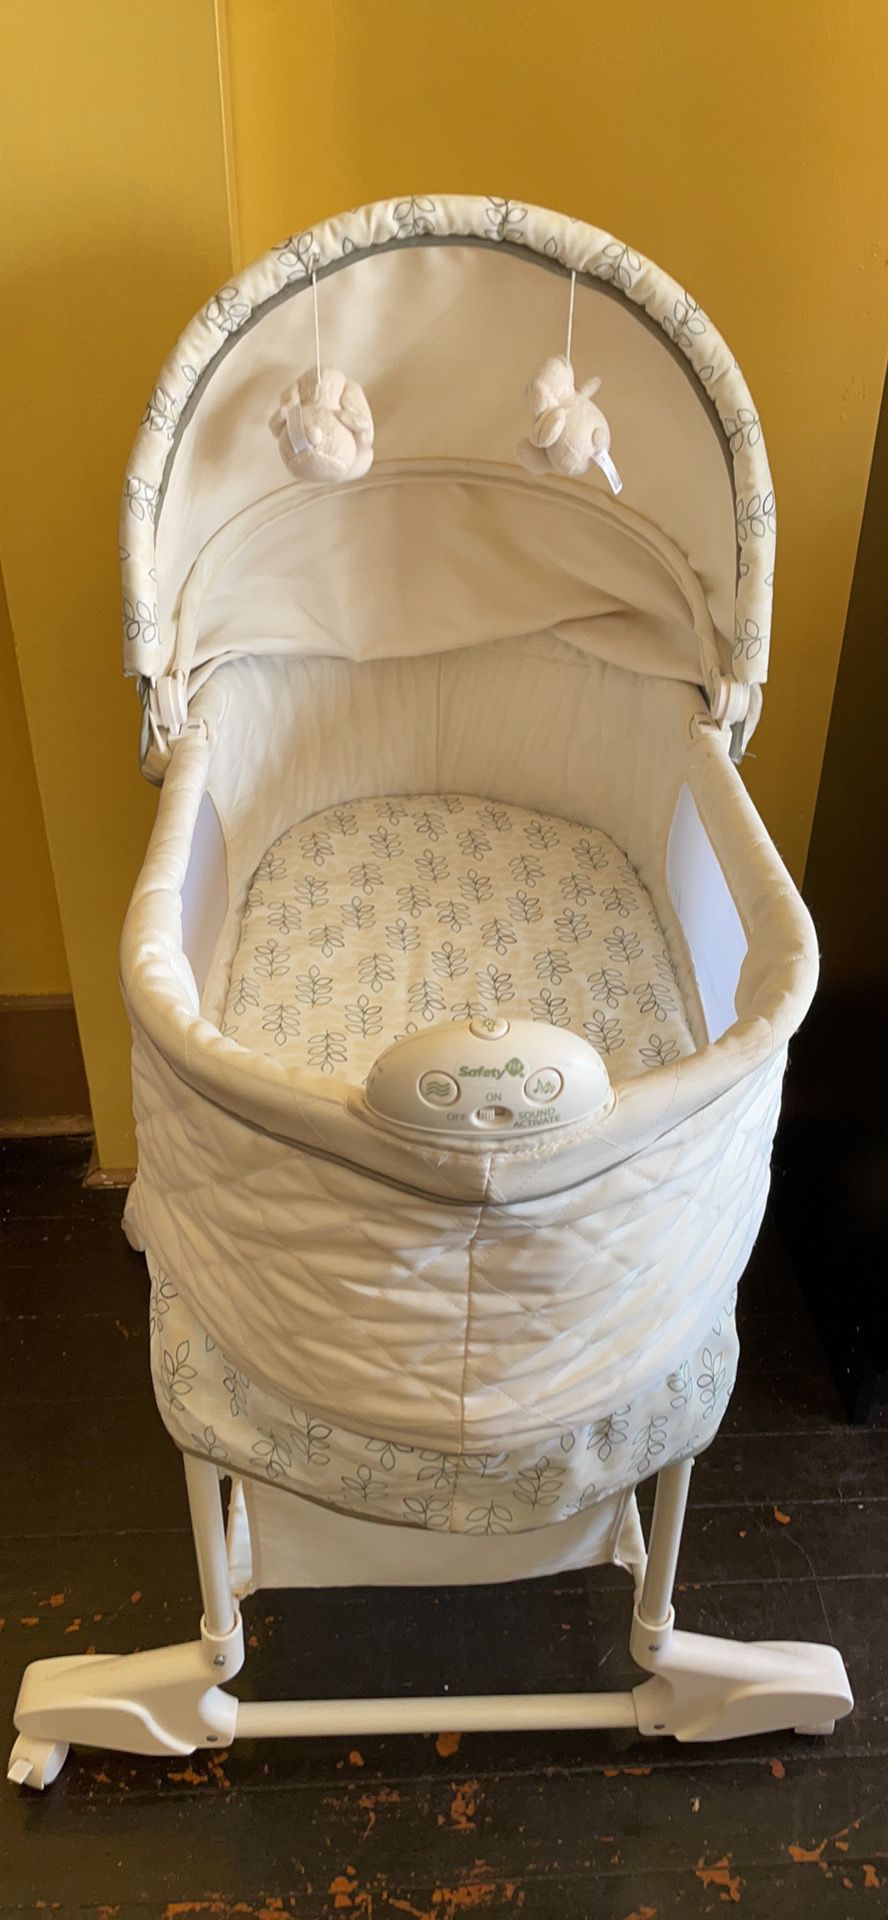 Bassinet- Barely Used